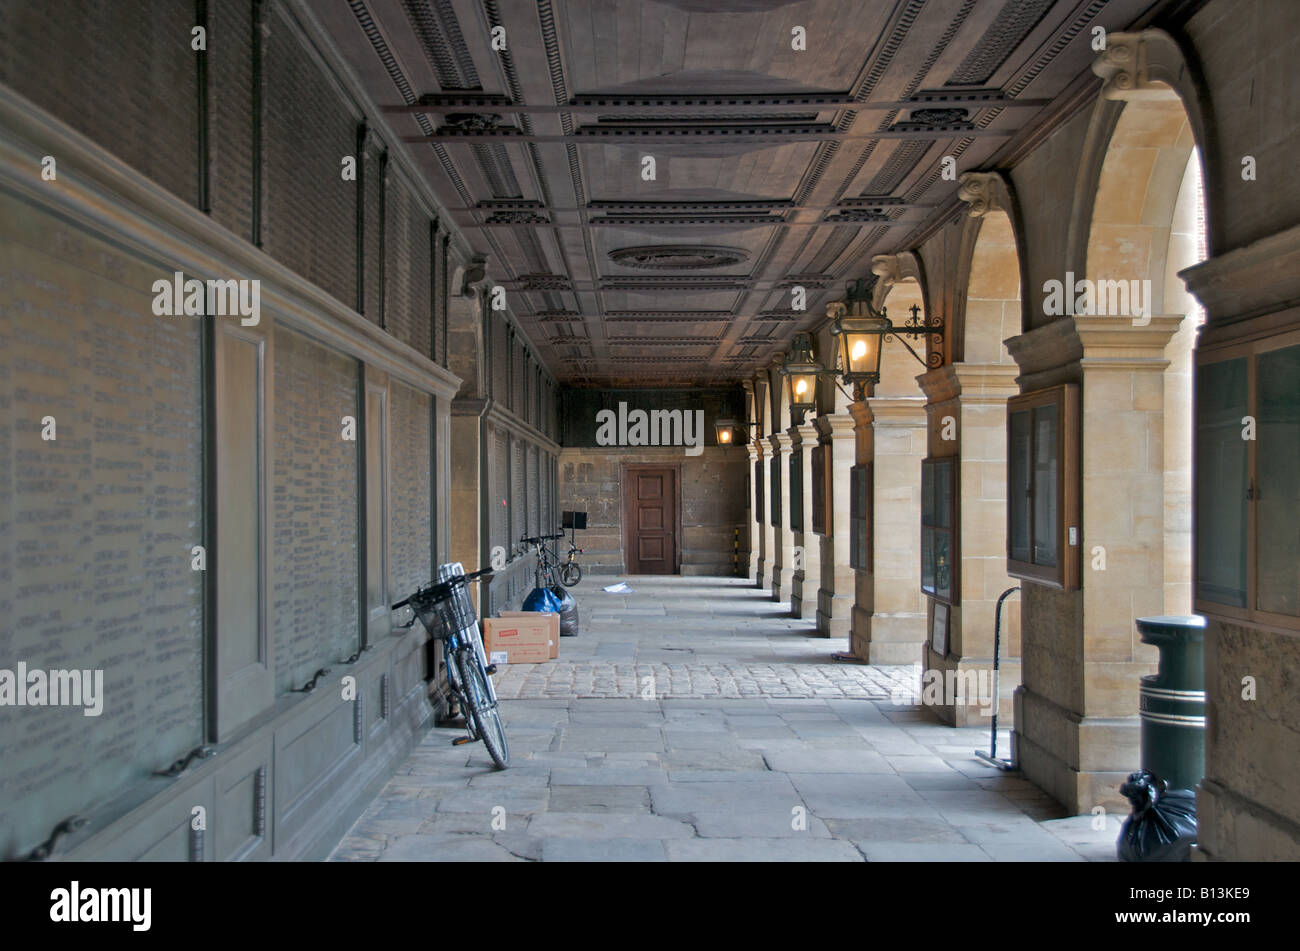 Cloisters leading into the main school yard at Eton College. Stock Photo